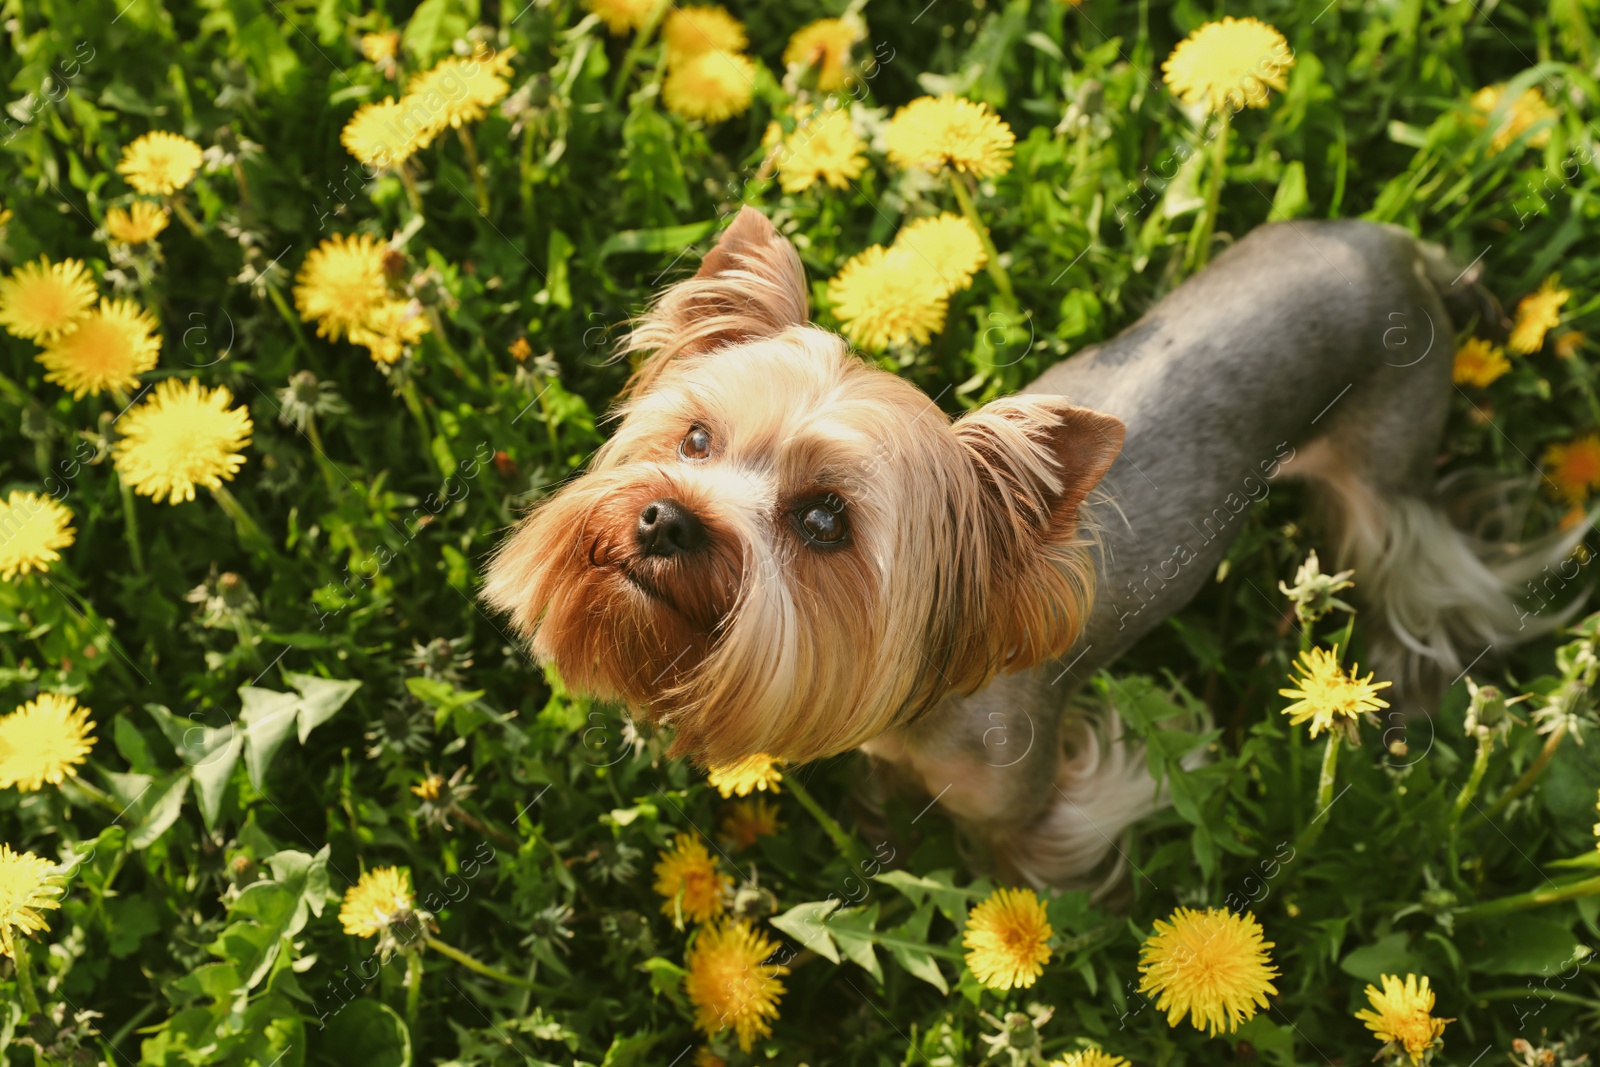 Photo of Cute Yorkshire terrier among beautiful dandelions in meadow on sunny spring day